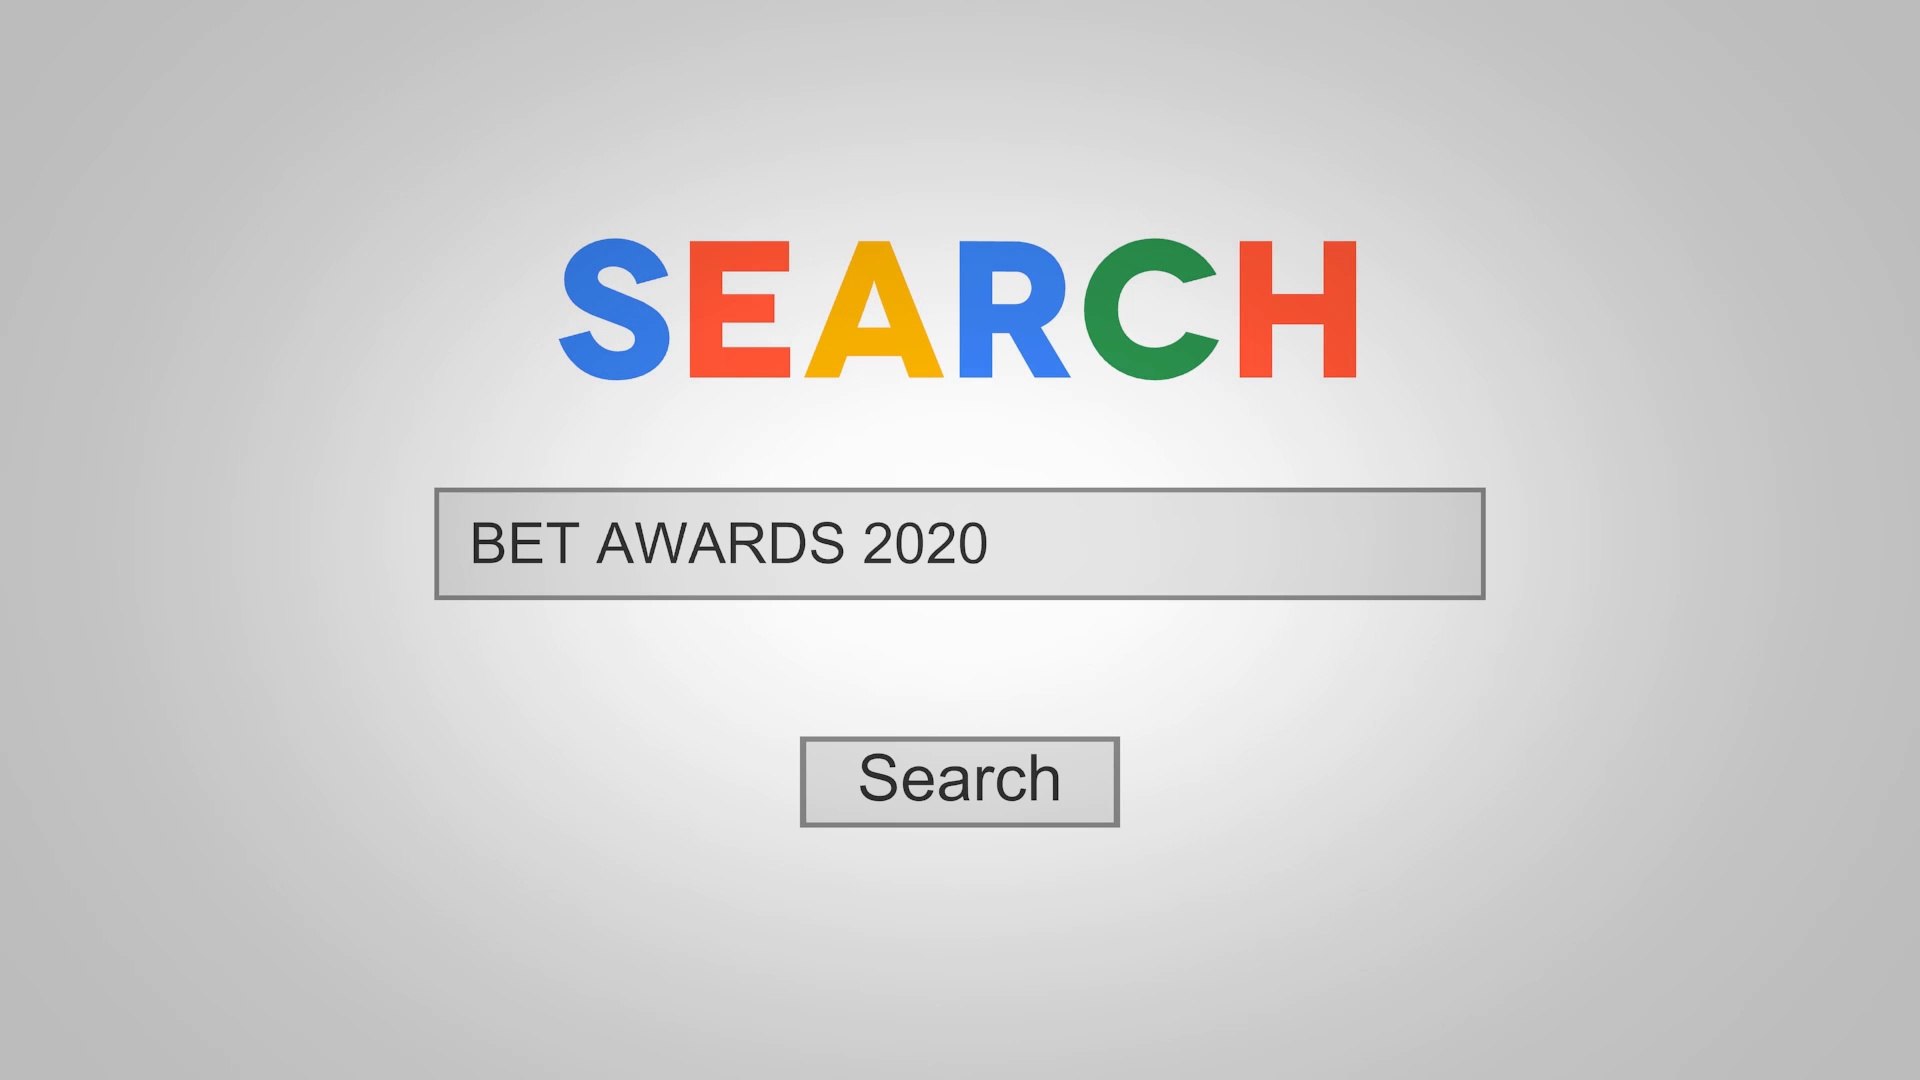 BET AWARDS 2020 AIRS LIVE ON BET & CBS JUNE 28th 8:00-11:00 PM EST